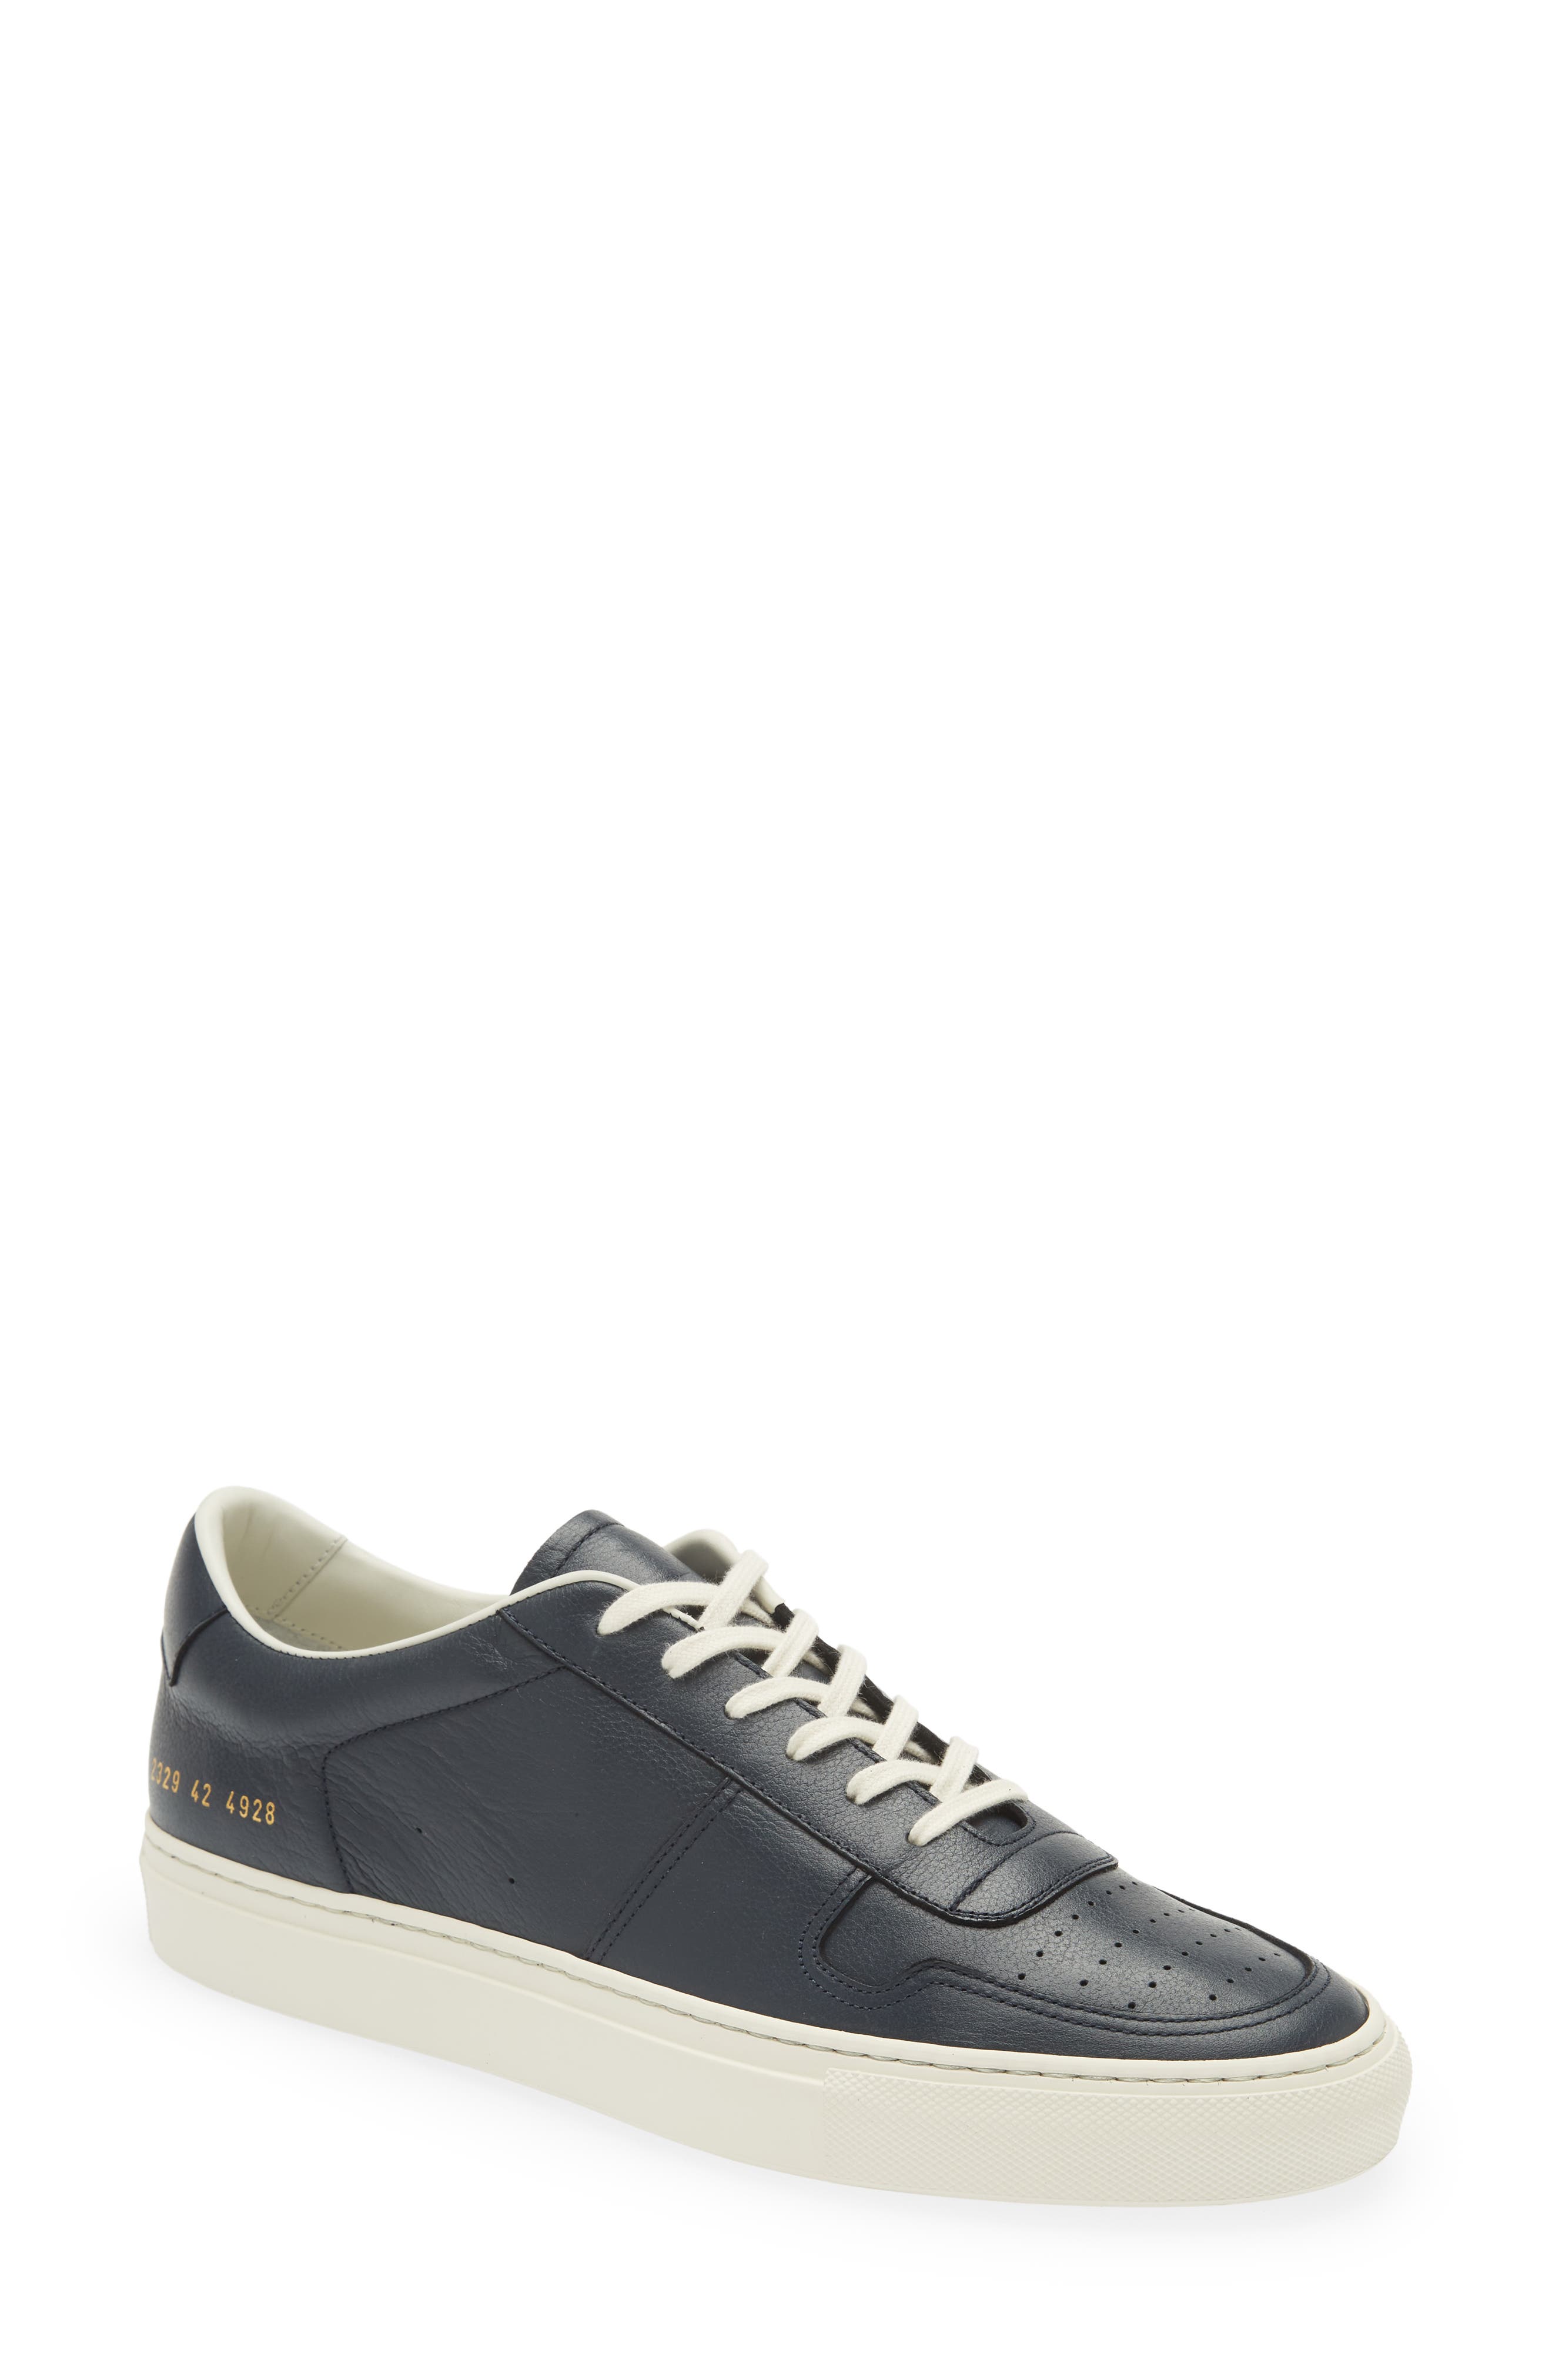 Common Projects Bball Summer Edition Sneaker in 4928 Navy at Nordstrom, Size 7Us